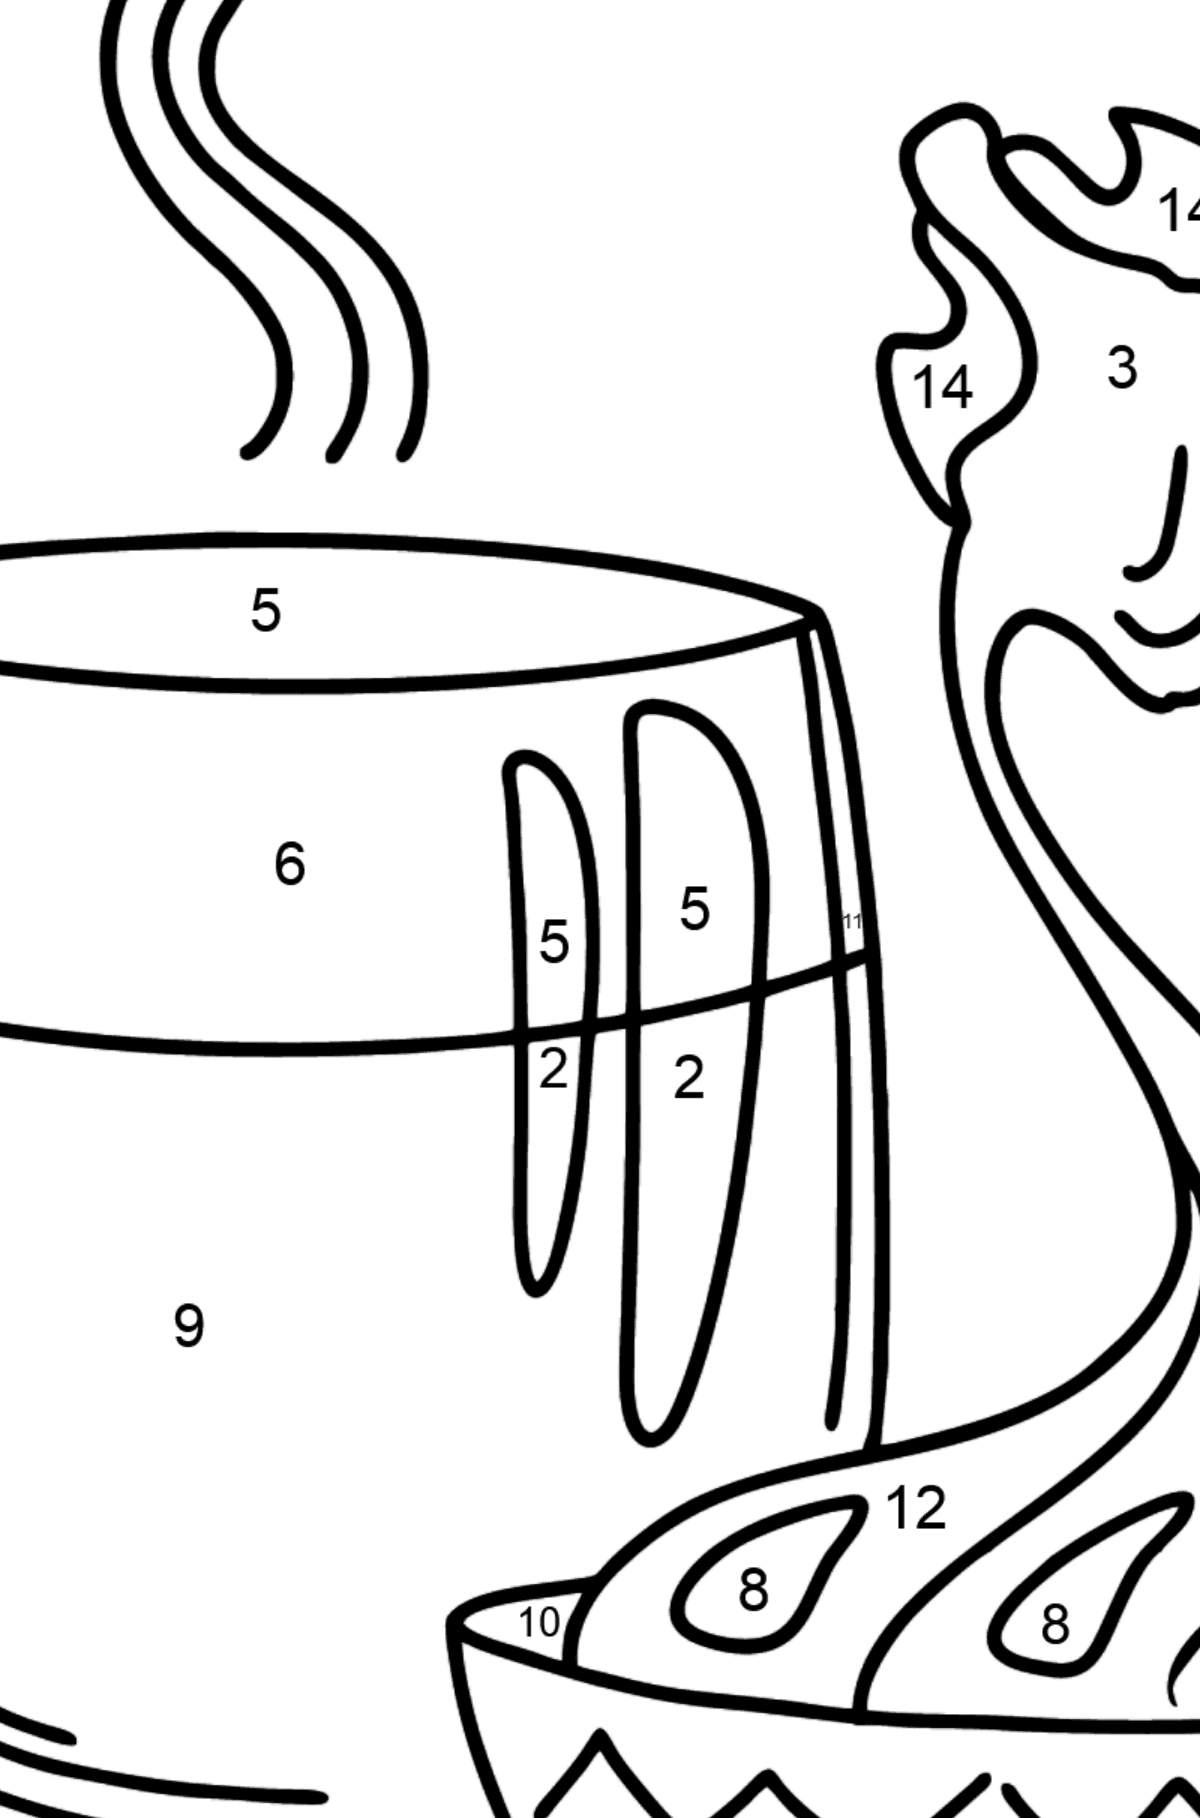 Milk with Honey coloring page - Coloring by Numbers for Kids